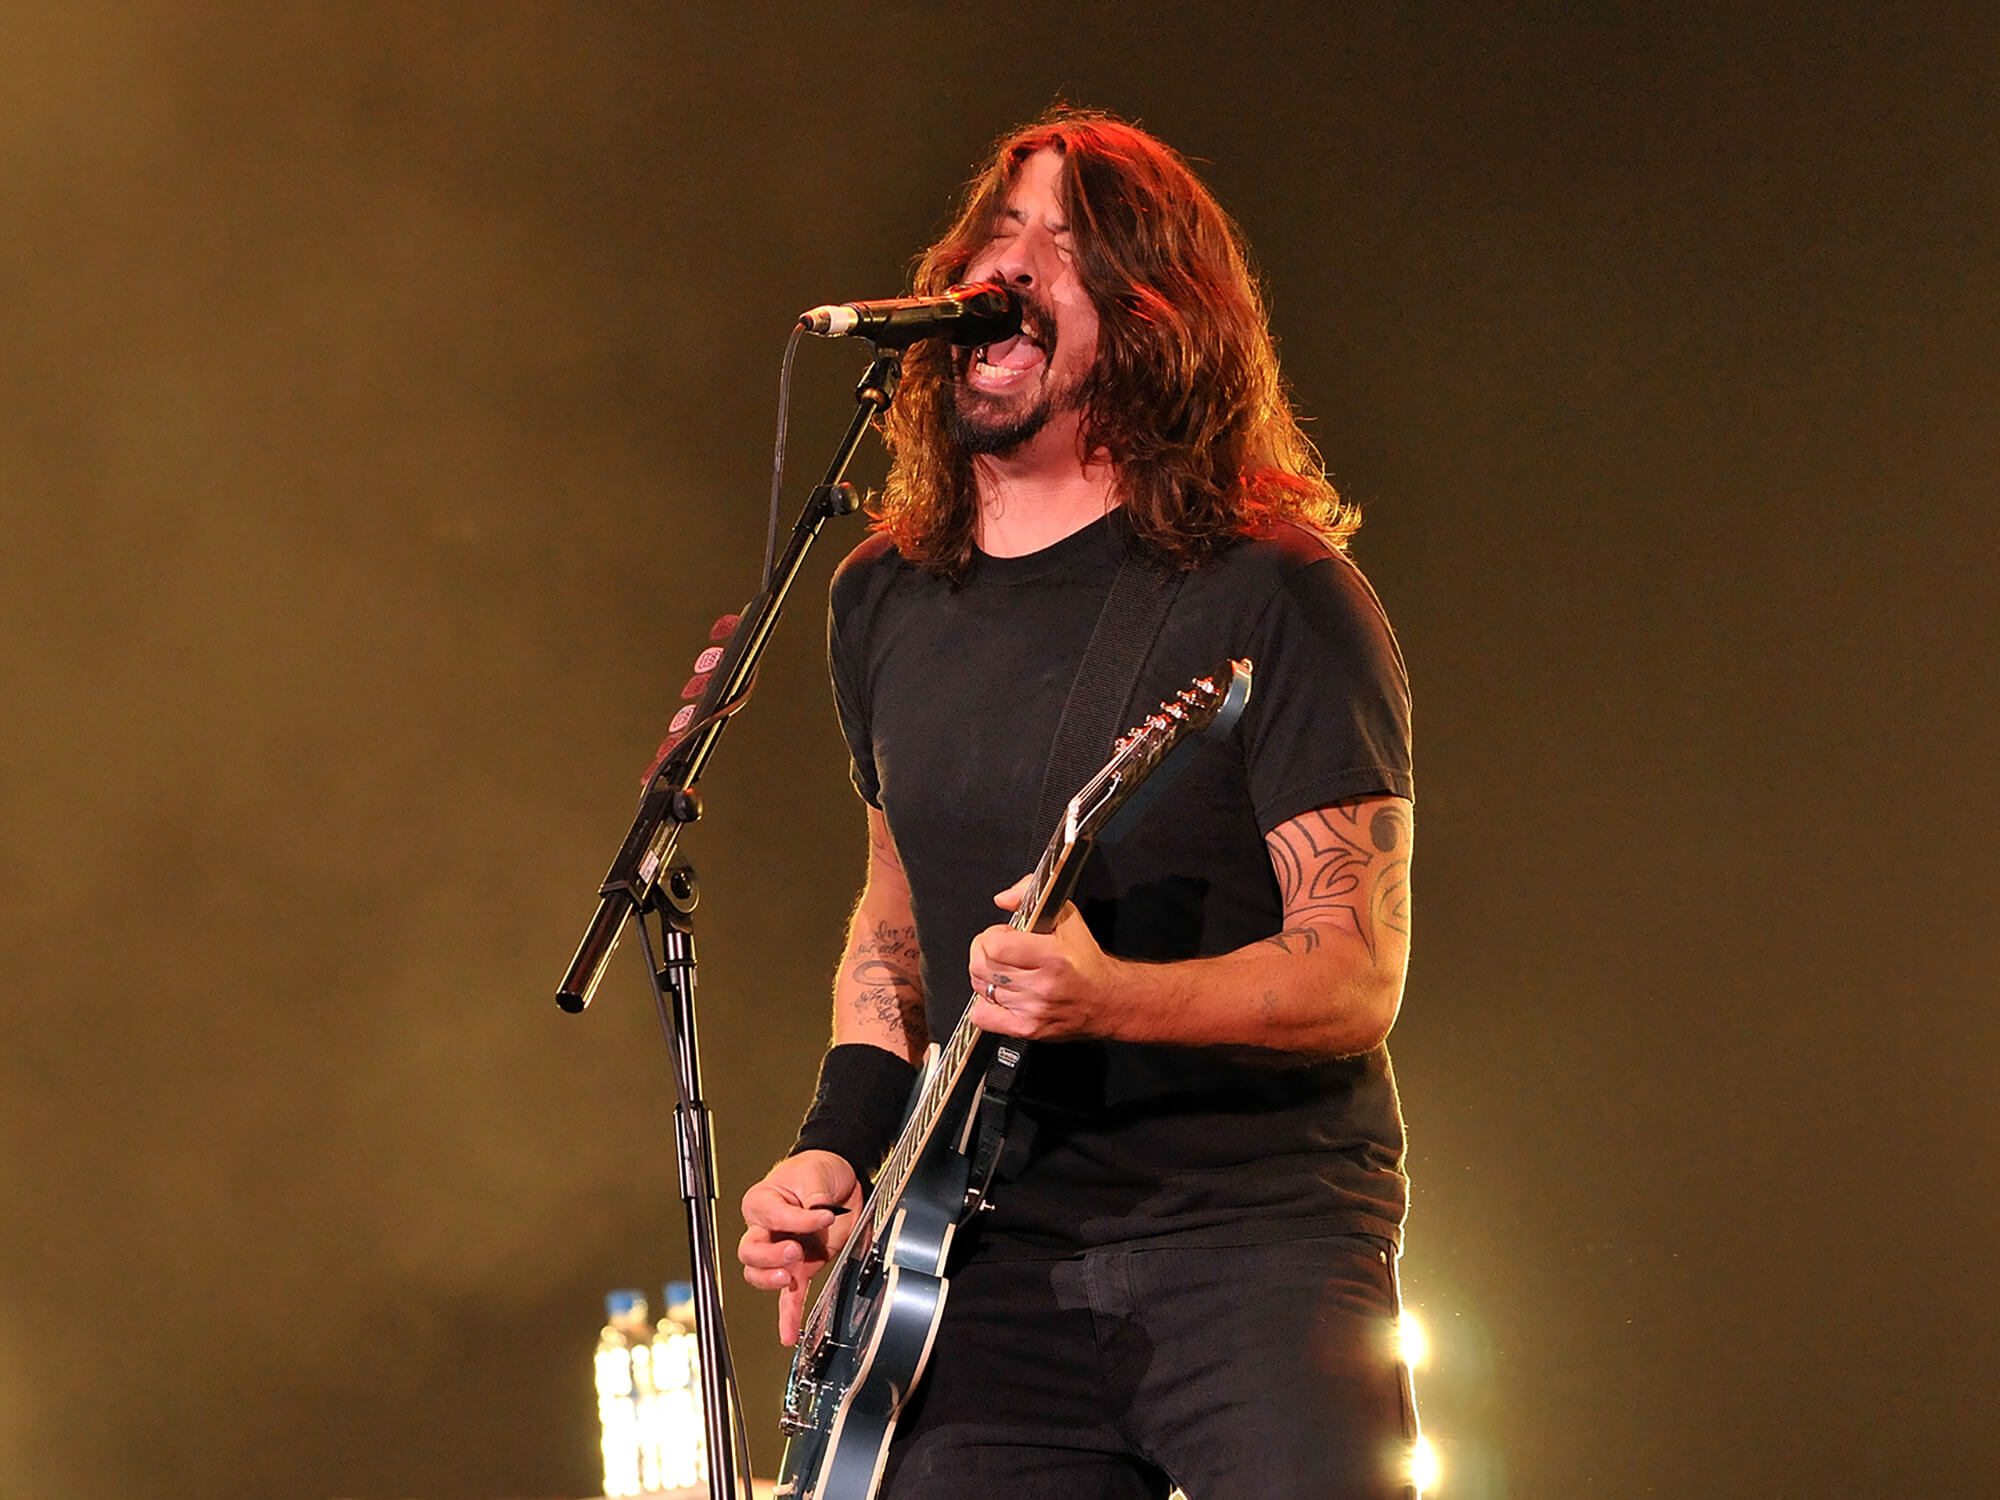 Dave Grohl performing in 2014, photo by Jim Dyson/Redferns via Getty Images